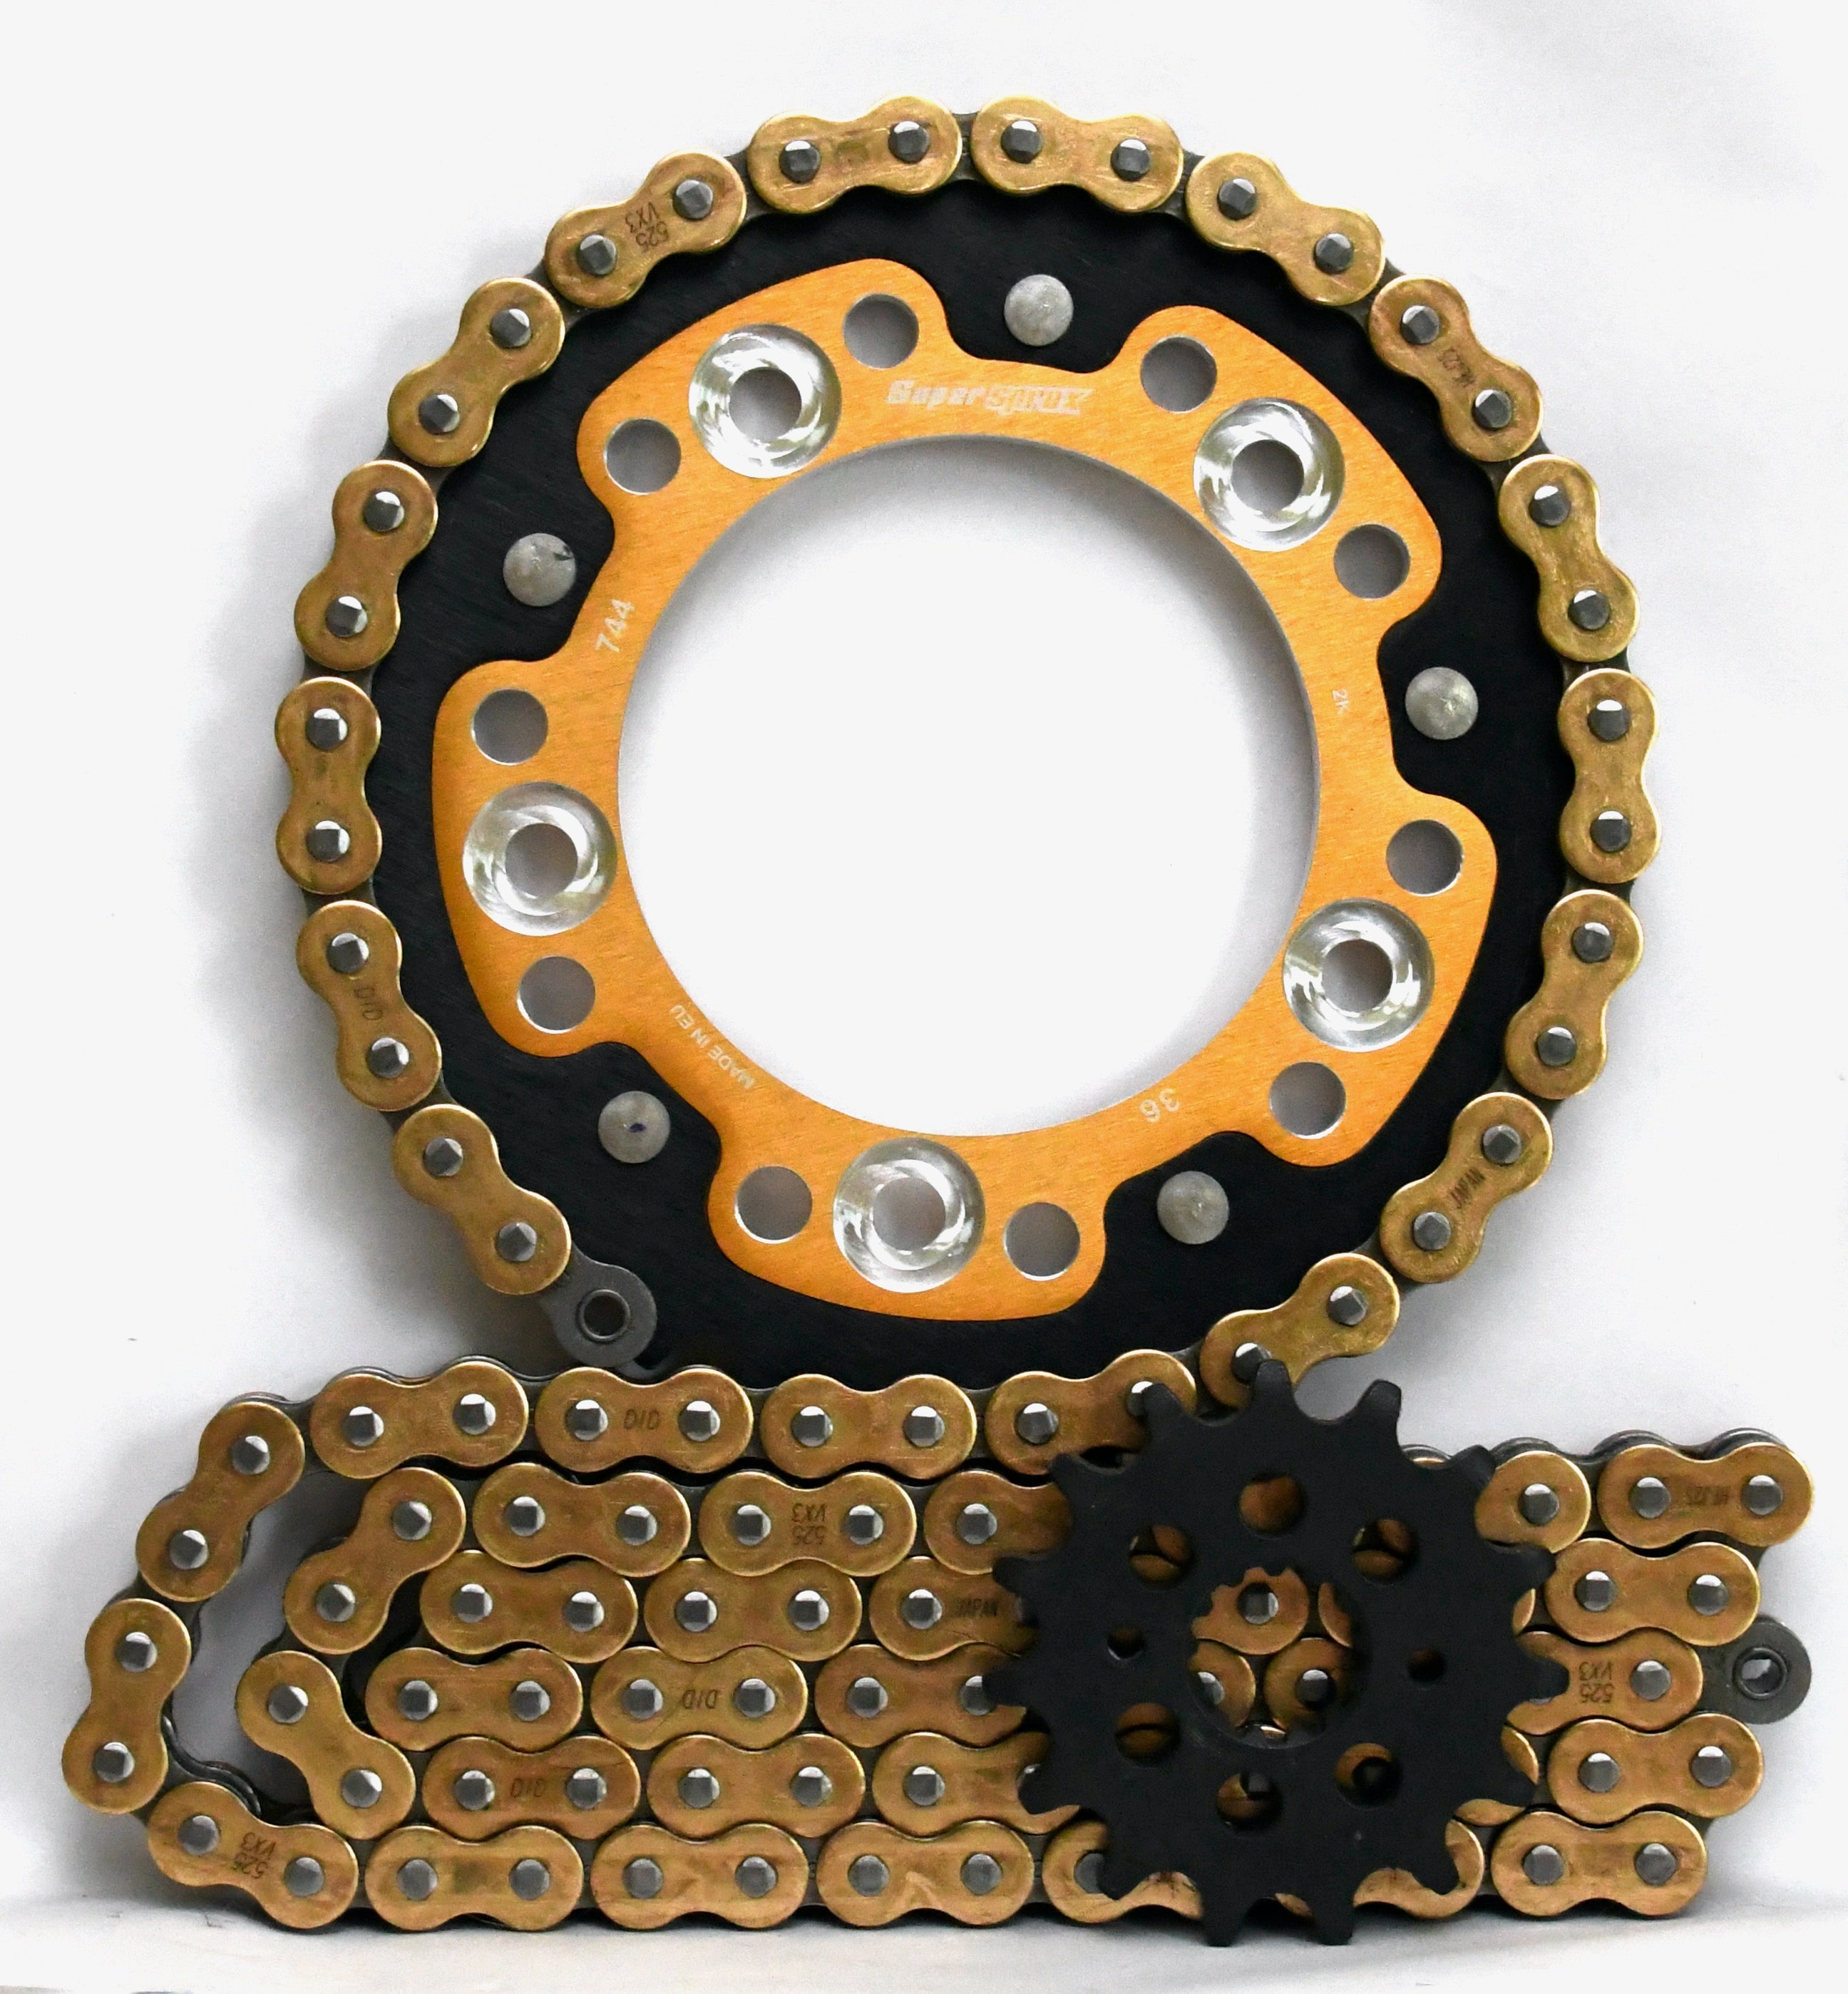 Supersprox Stealth and DID Chain & Sprocket Kit for Ducati 999 Inc R/S 2003-2006 - Standard Gearing